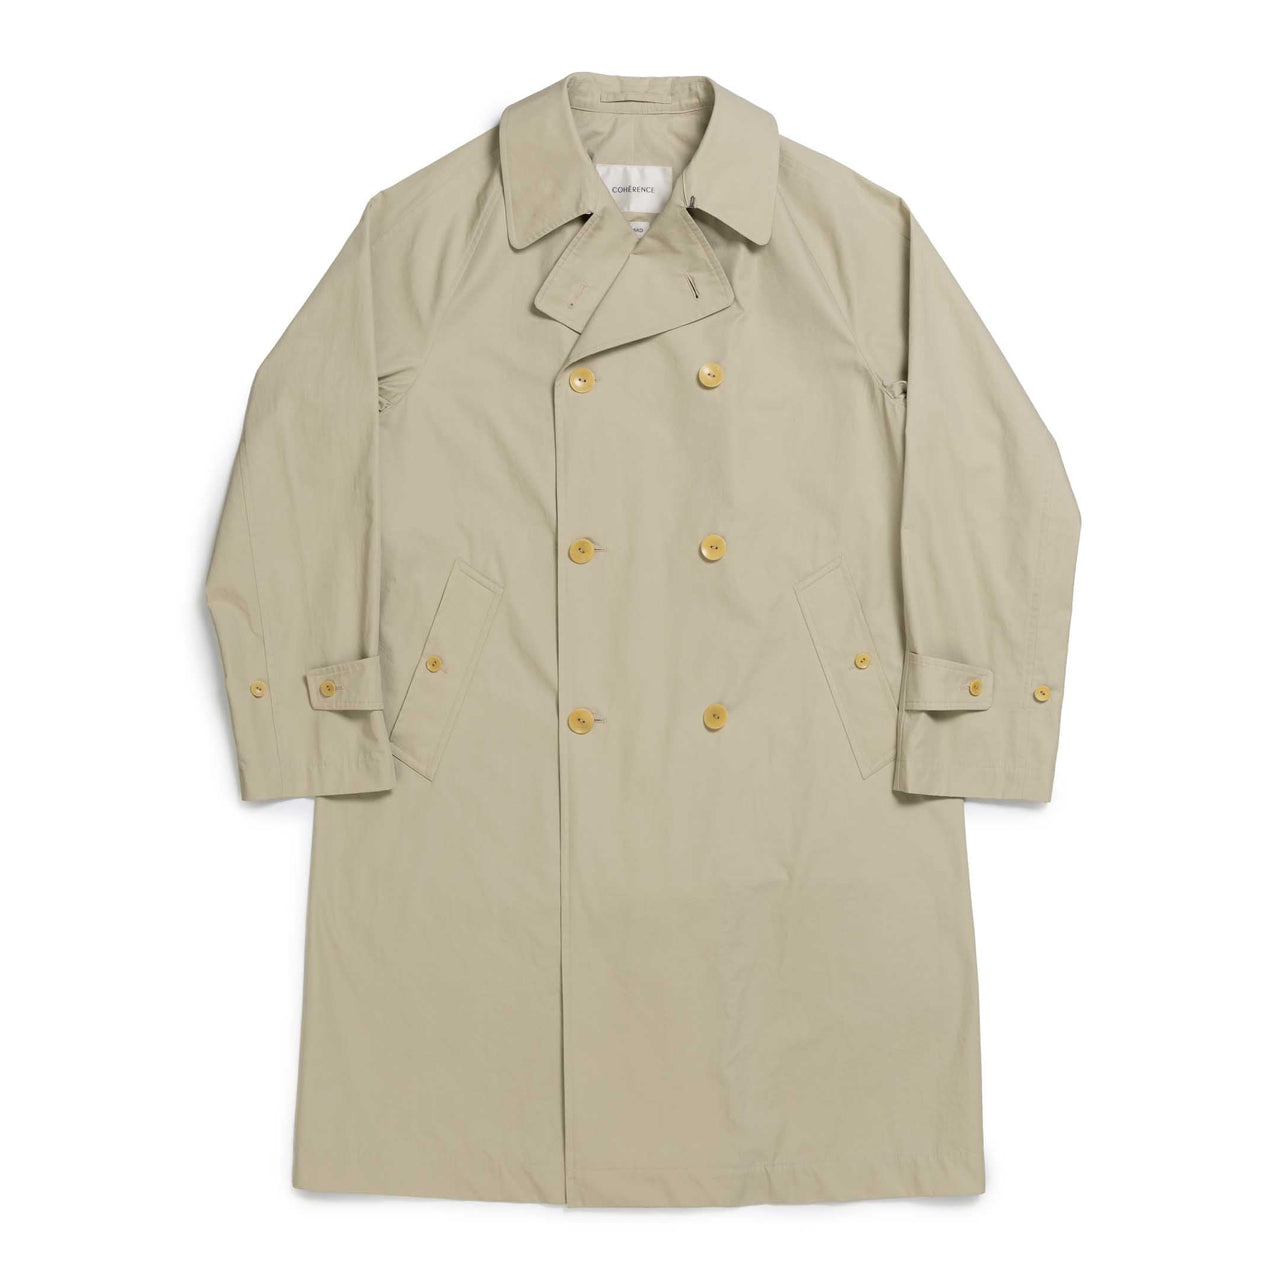 Coherence Fou Fou II Weather Resistant Cotton Sand-Coat-Clutch Cafe